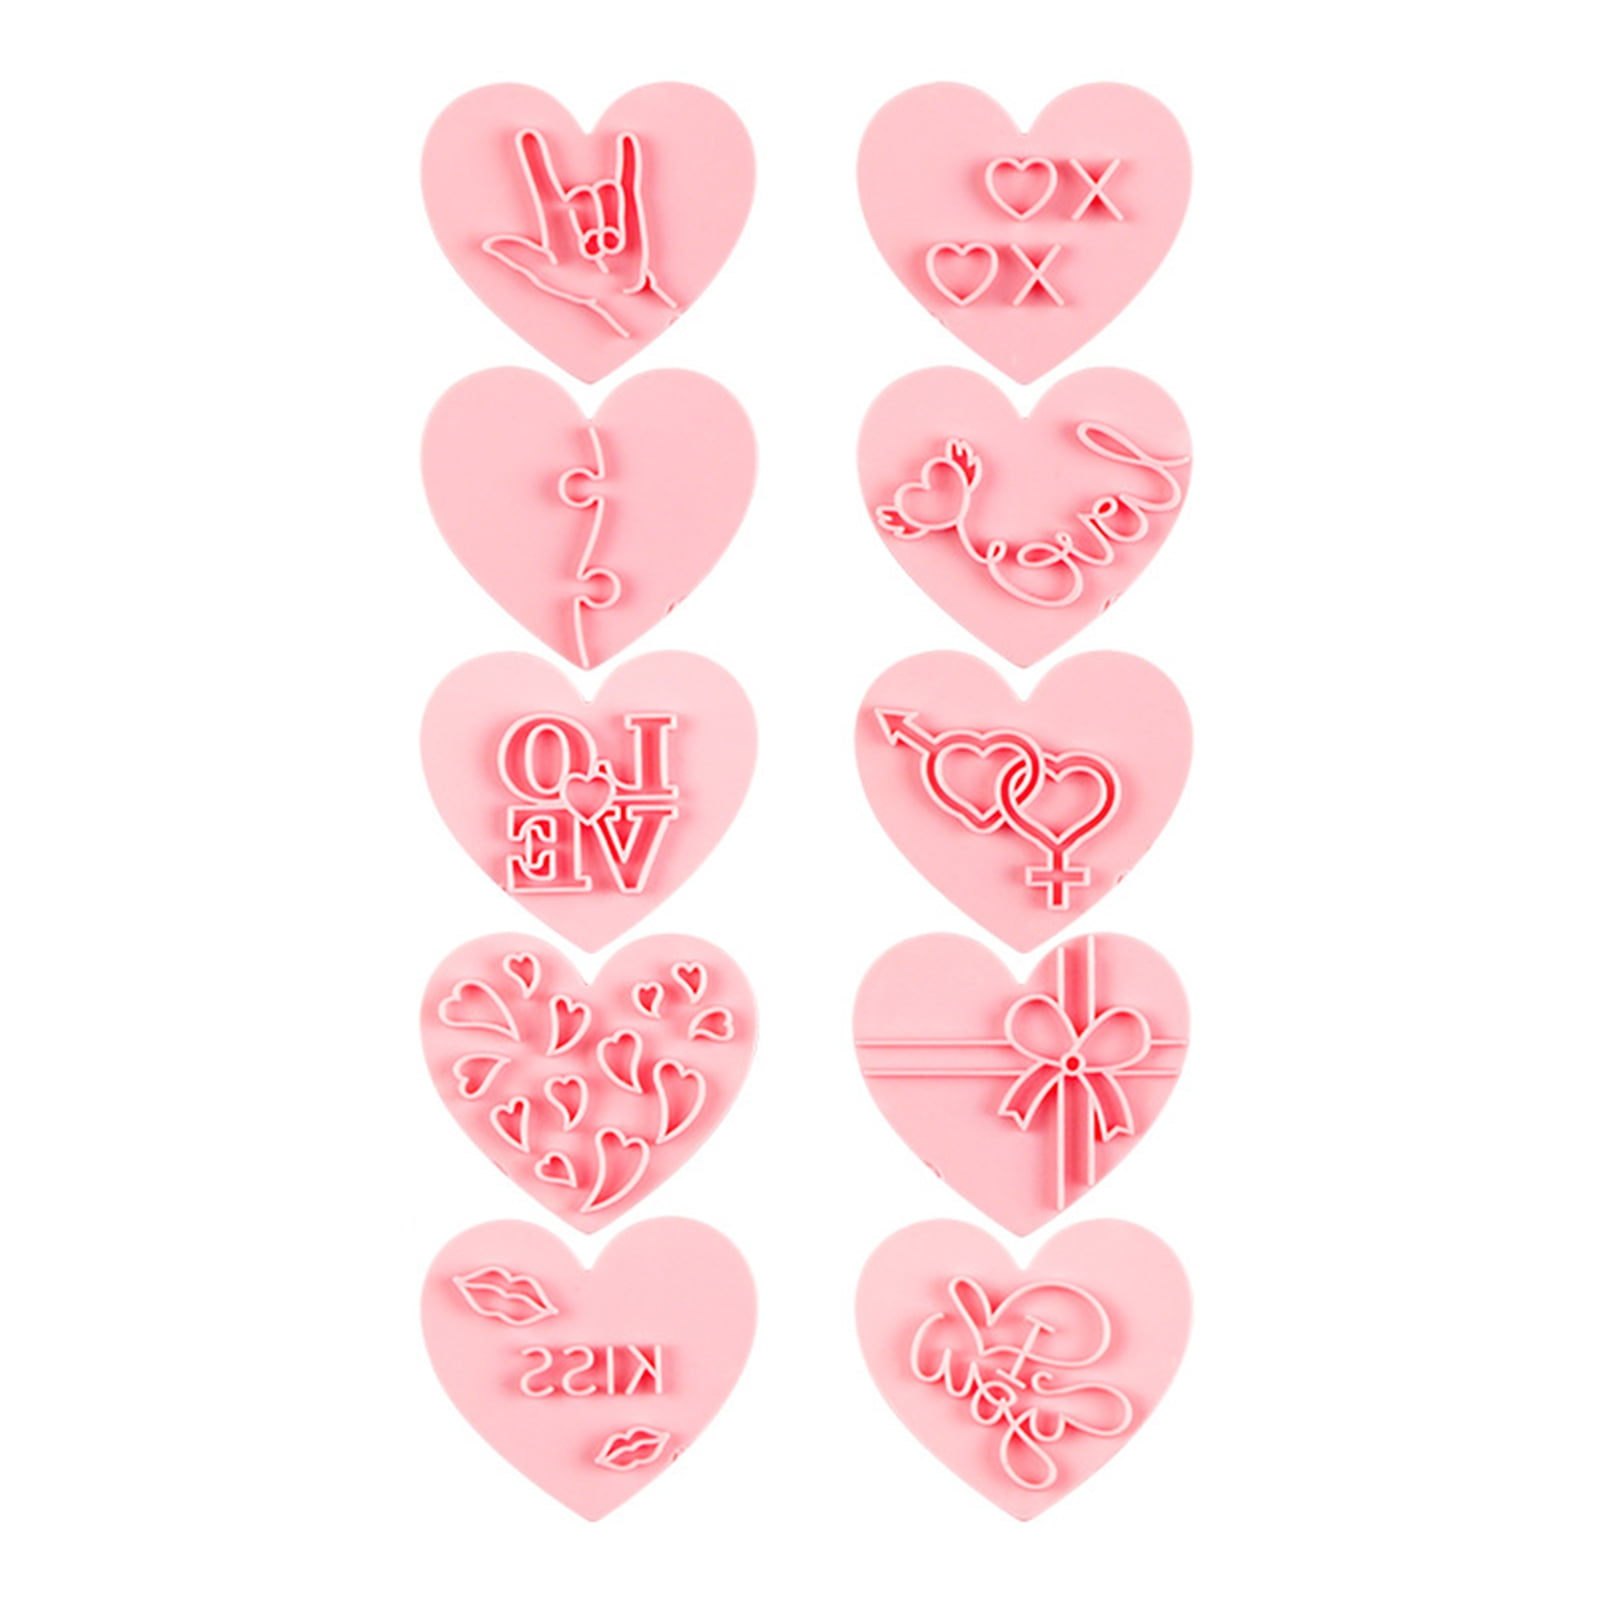 33pcs/set Star Flower Heart Shaped Cookie Stamp, Fondant Mold, Baking  Tools, Kitchen Gadgets, Fondant Cake, Cookie, Plunger Cutter, Leaves  Butterfly Heart Shape Decorating Mold DIY Tools,Kitchen Accessories